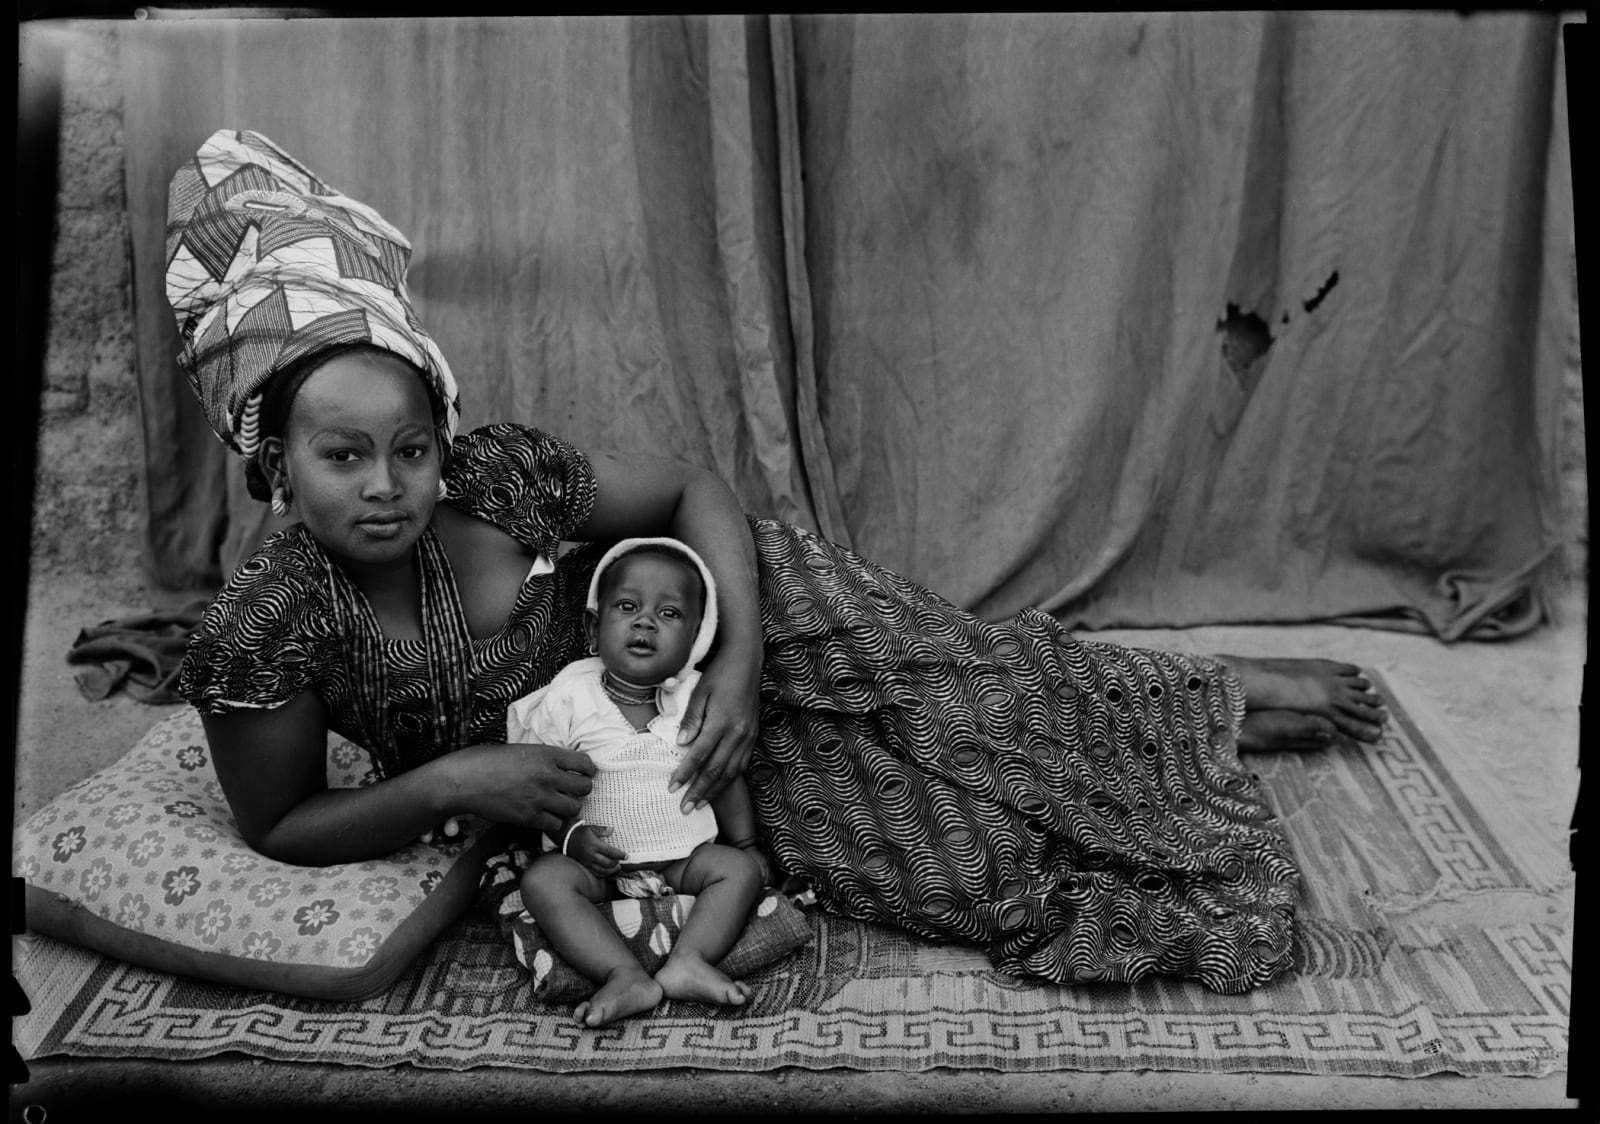 Seydou Keïta Sans titre/ Untitled (01052-MA.KE.308), 1952-1955 Posthumous Gelatin black and white silver print on cartoline paper 280g 60 x 50 cm (23 5/8 x 19 5/8 in.) Edition of 10 + 2 AP Posthumous Gelatin black and white silver print on cartoline paper 280g back-mounted on Aluminium 1mm 162 x 122 cm (63 25/32 x 48 1/32 in) Edition of 5 + 2 AP